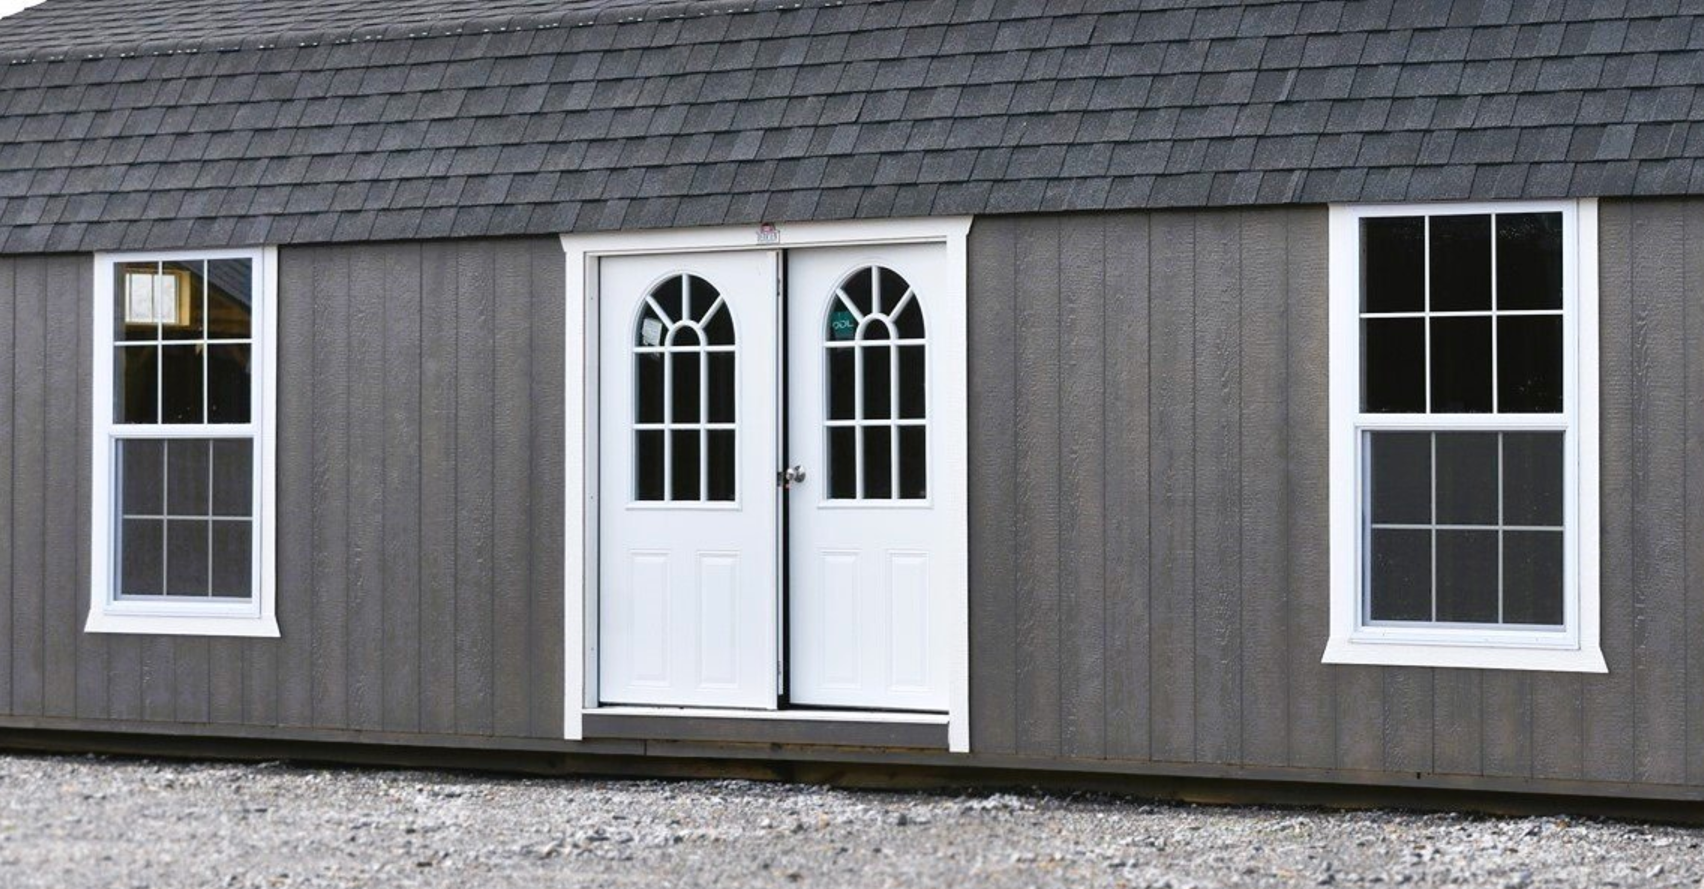 Upselling Sheds: Advice for Selling Higher-Dollar Projects